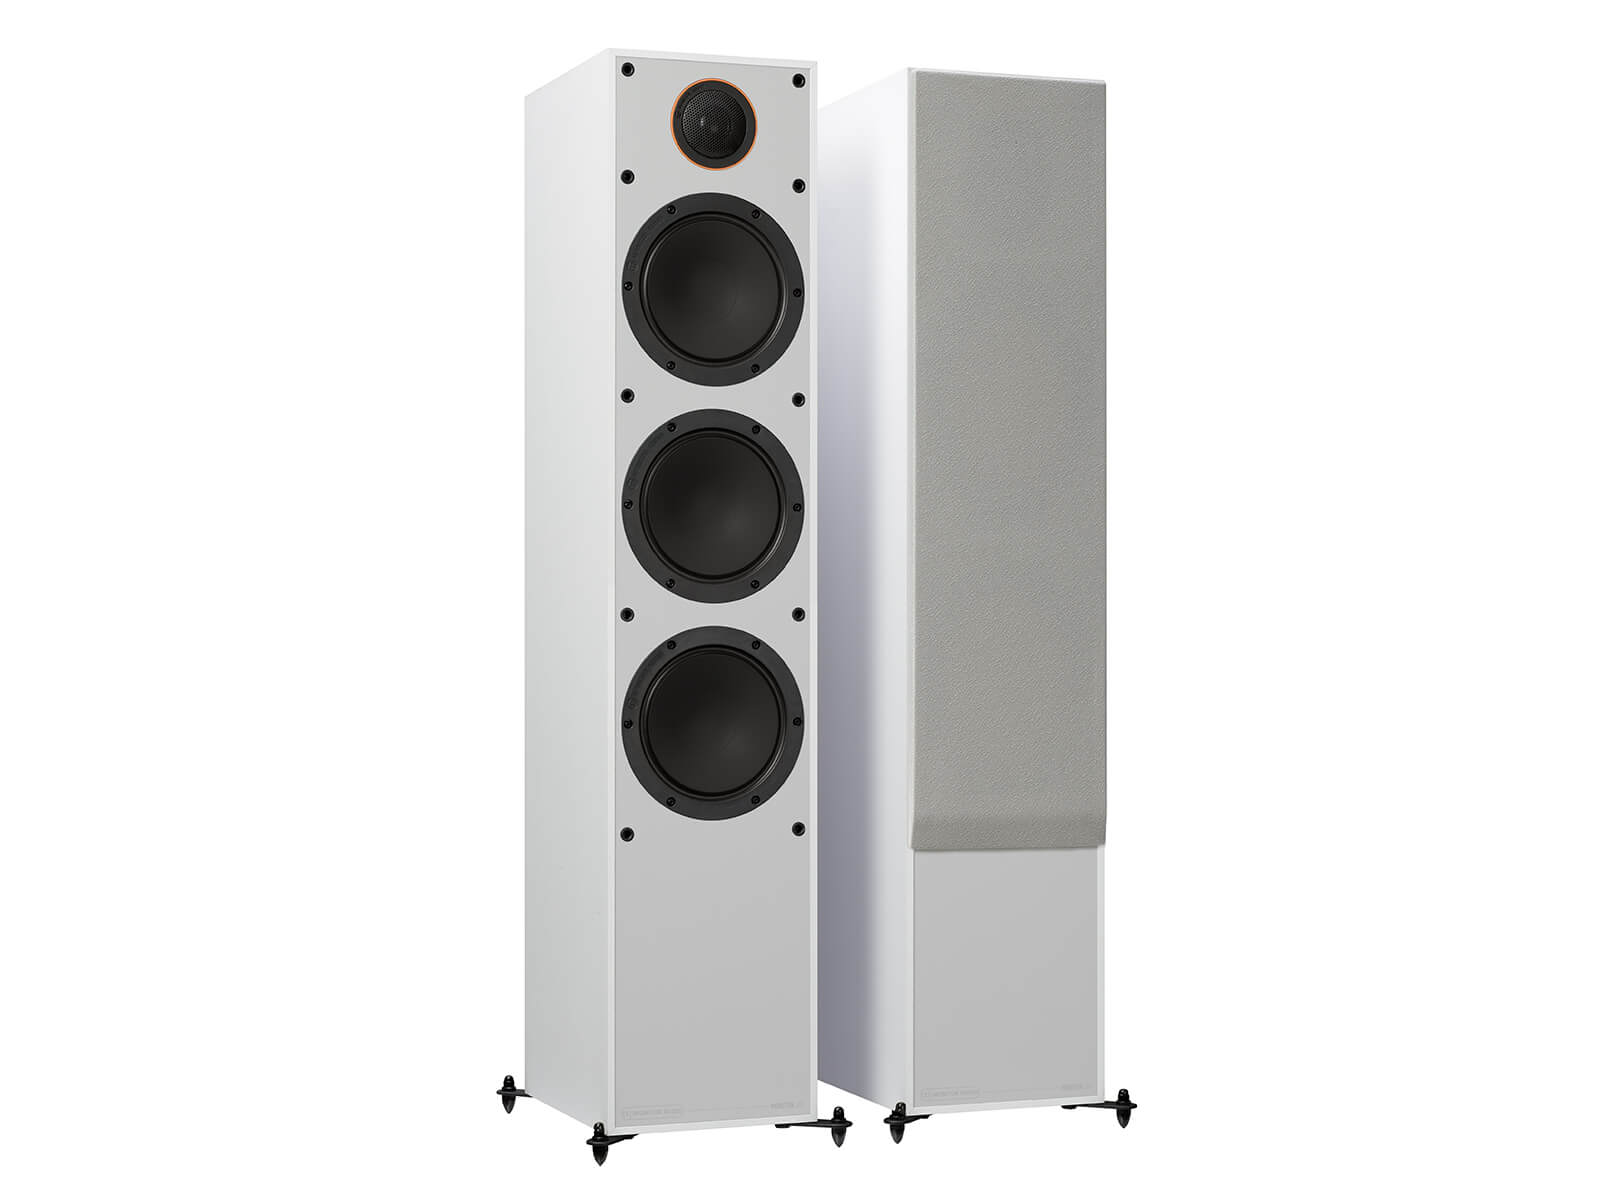 Monitor 300, floorstanding speakers, with and without grille in a white finish.